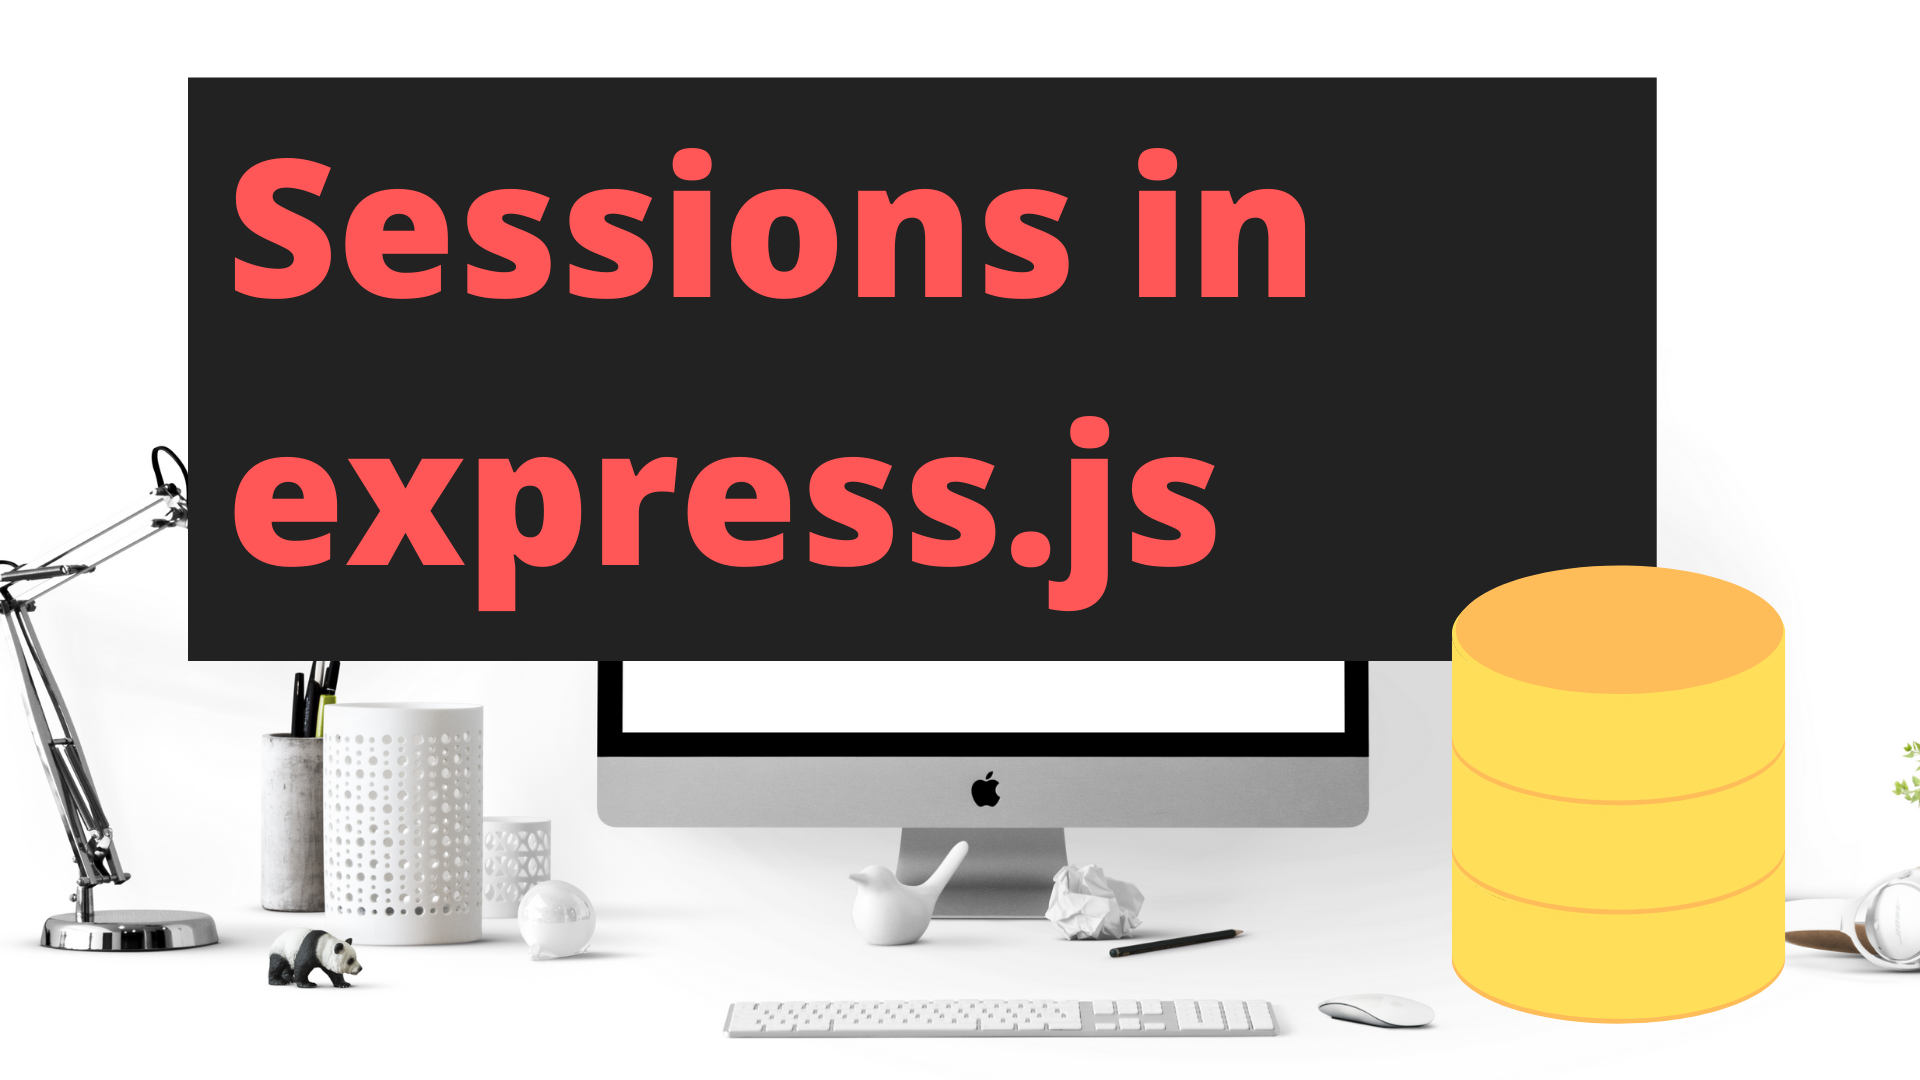 Express sessions with redis